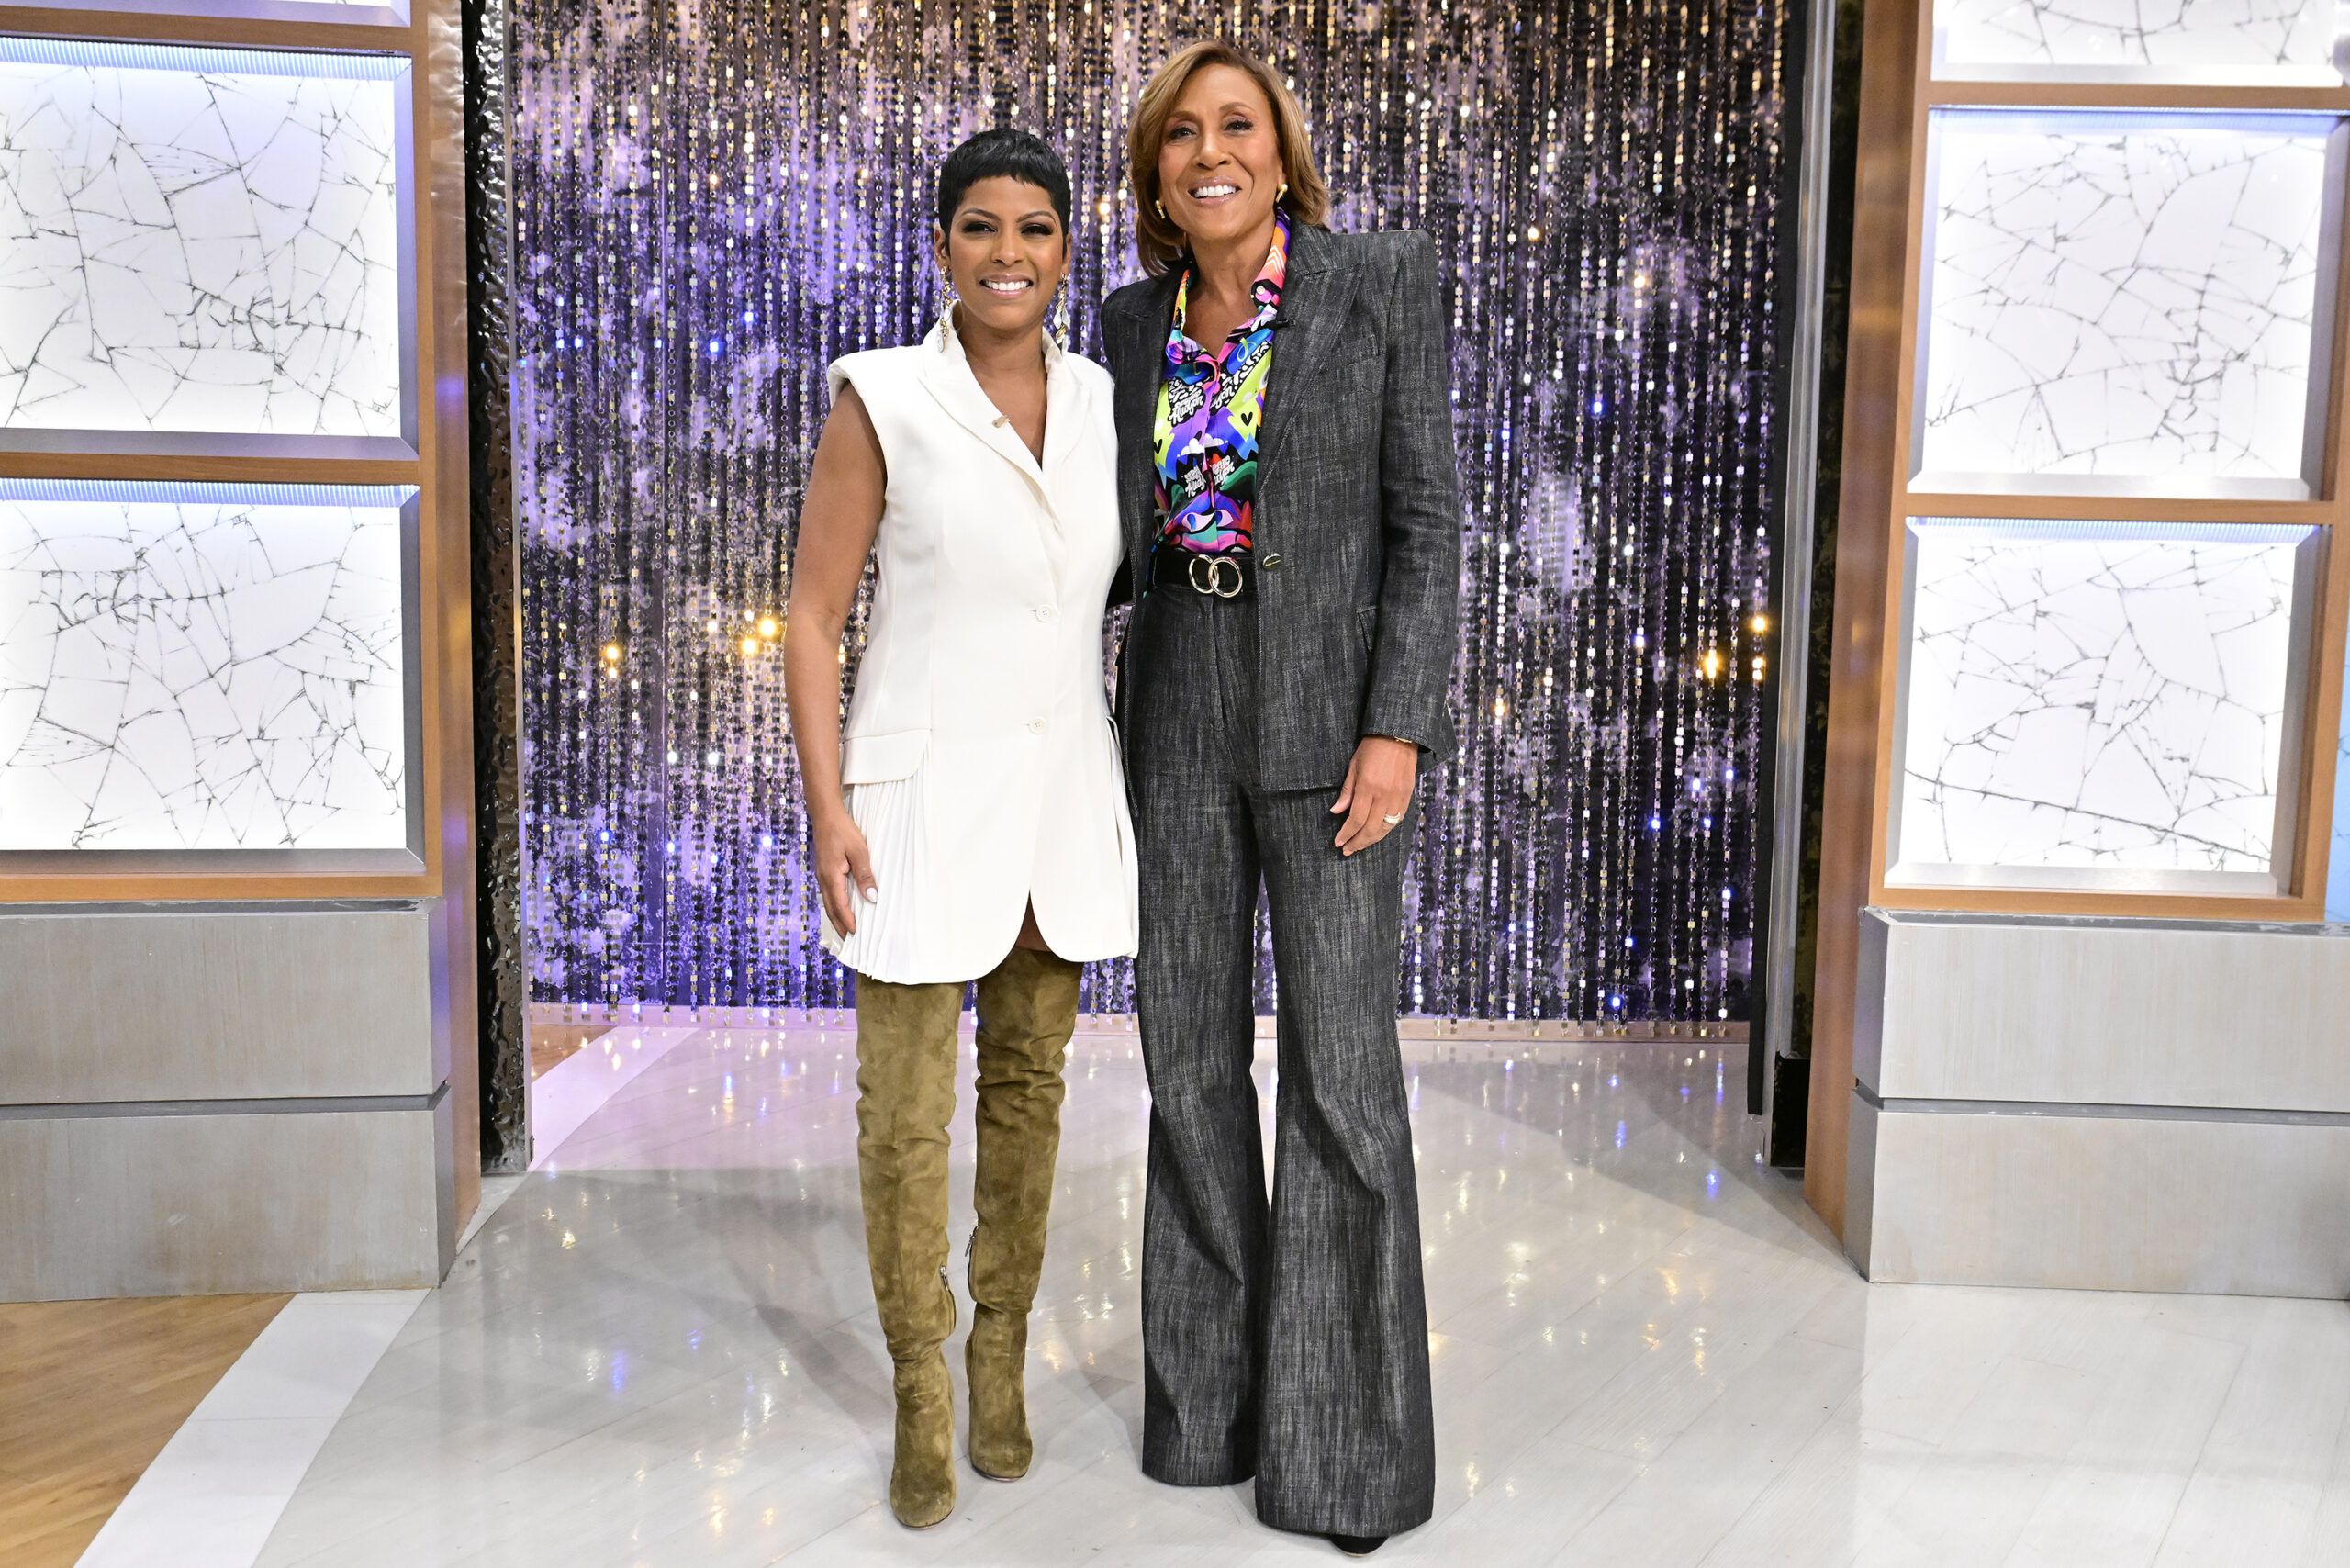 Robin Roberts Talks About Her New Broadcast Journalism Facility At Her Alma Mater